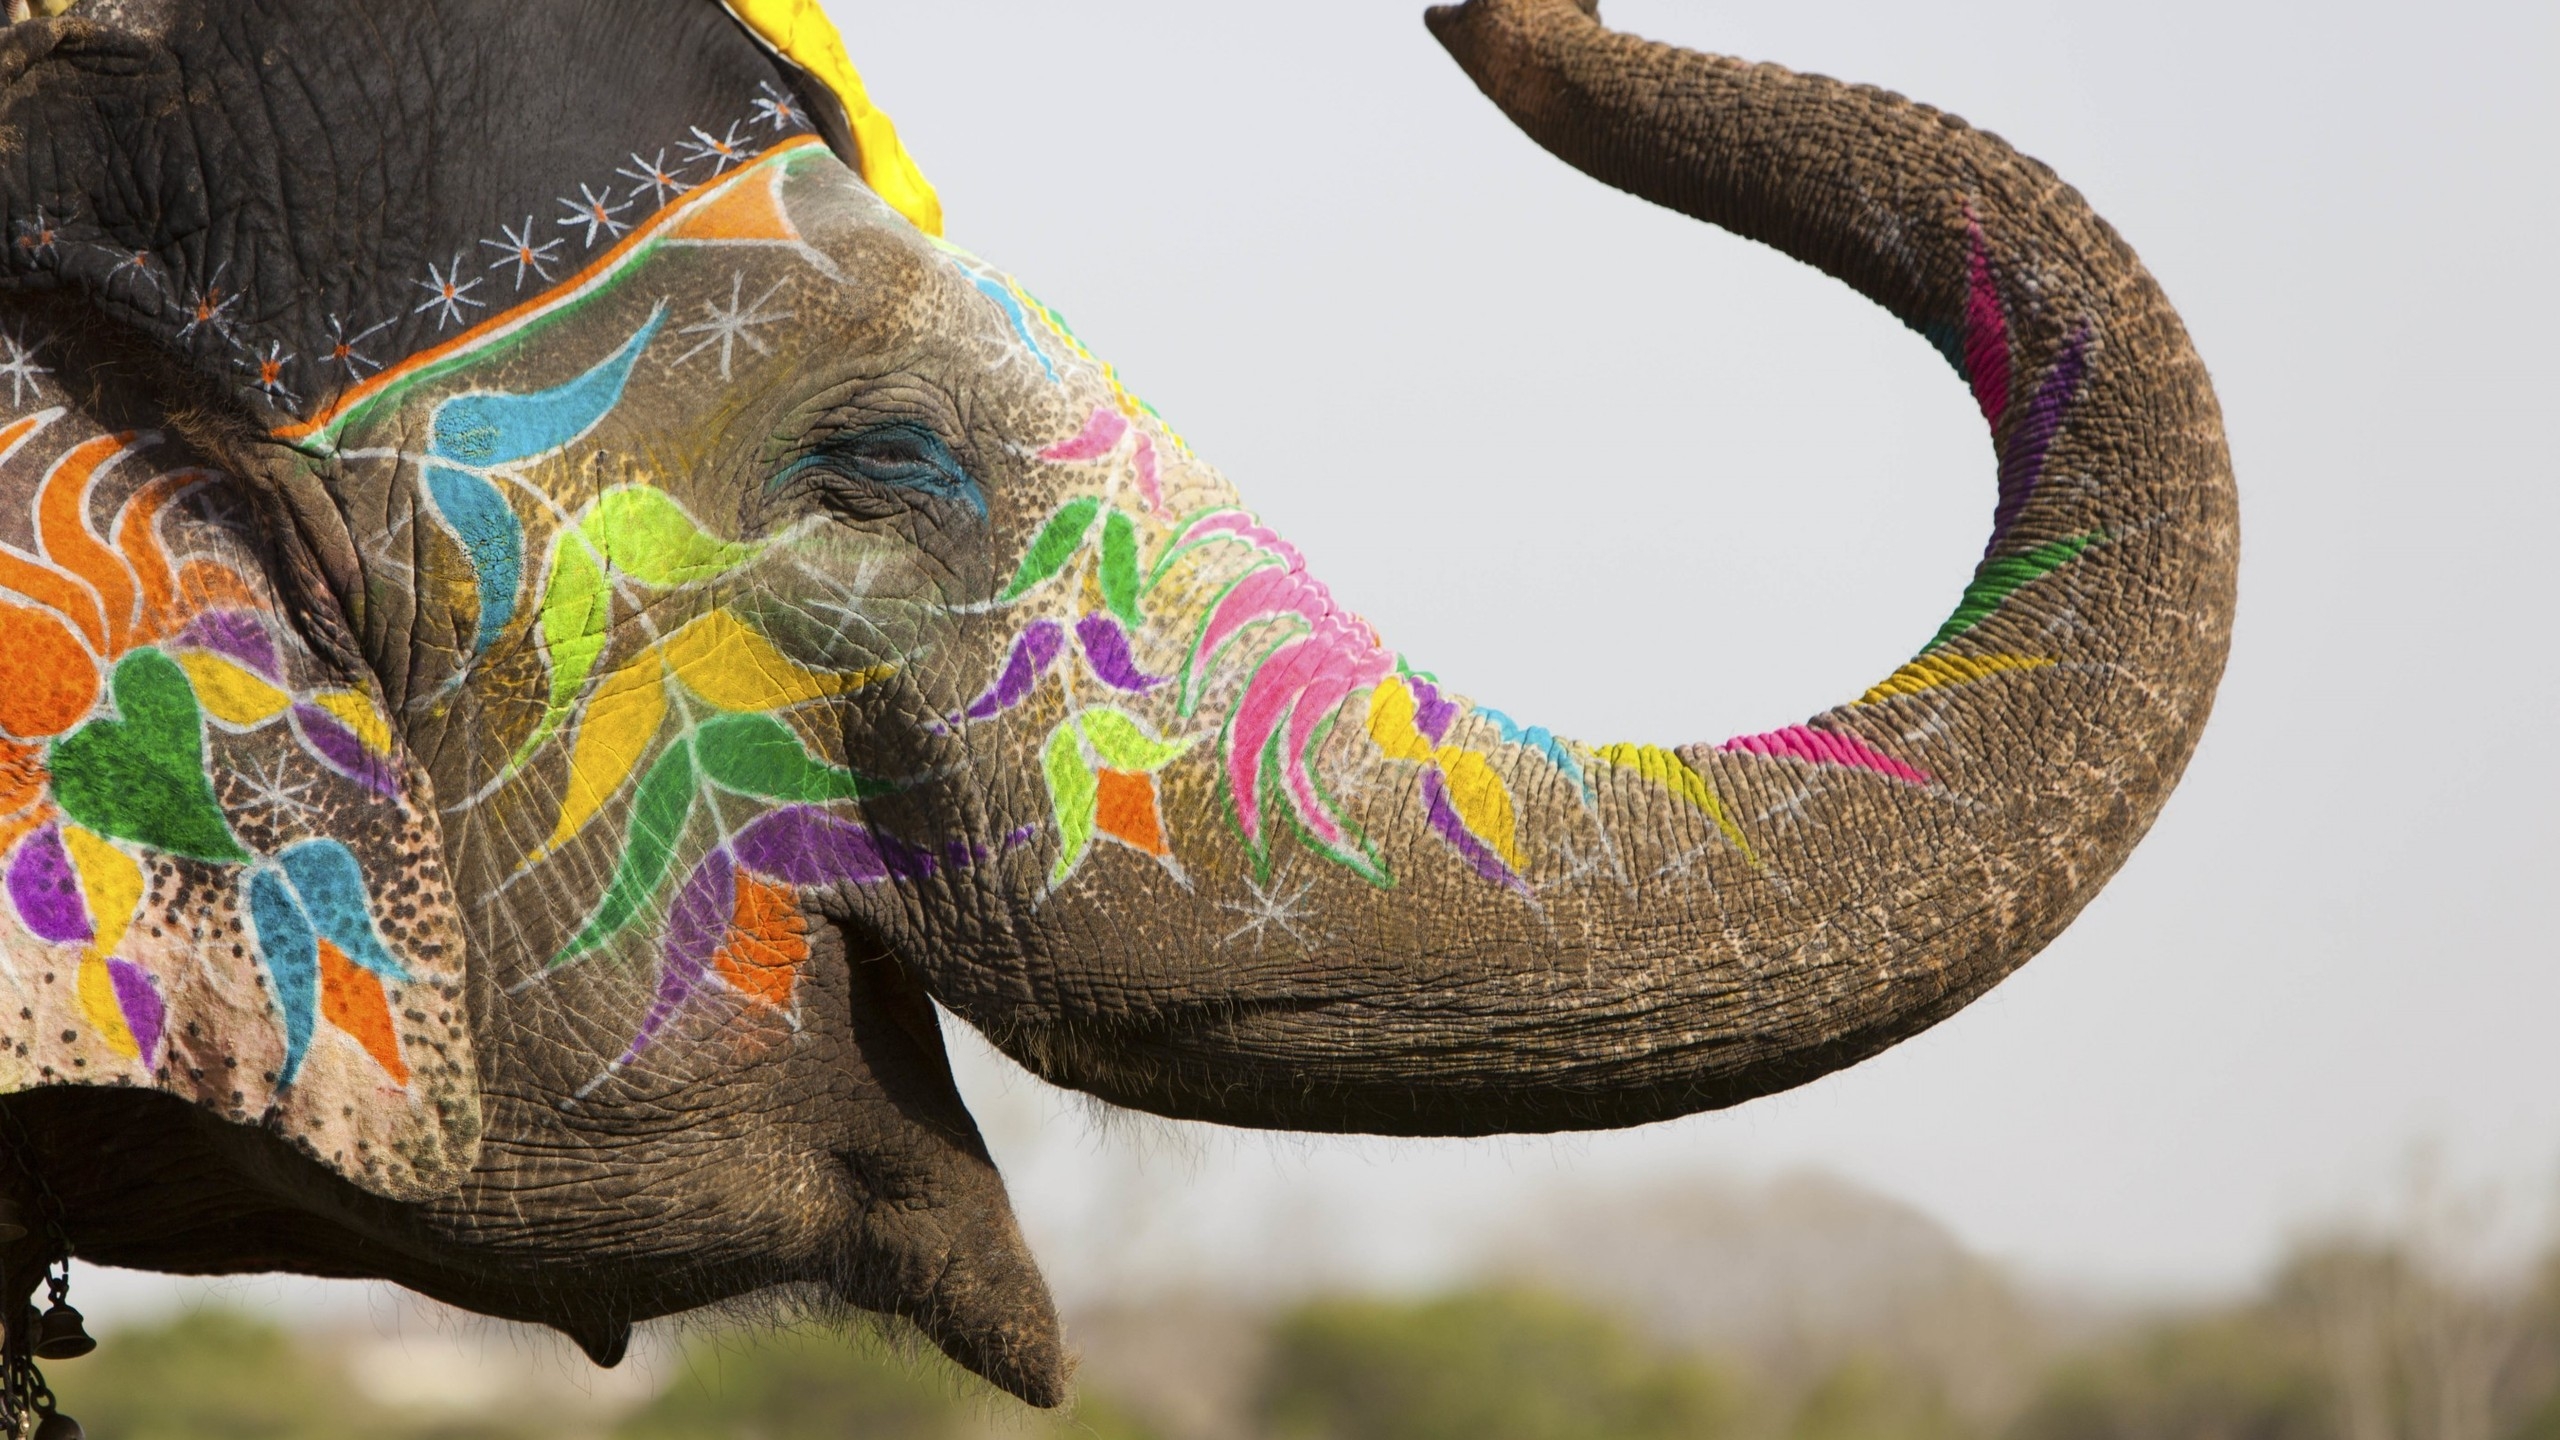 Colored Elephant for 2560x1440 HDTV resolution